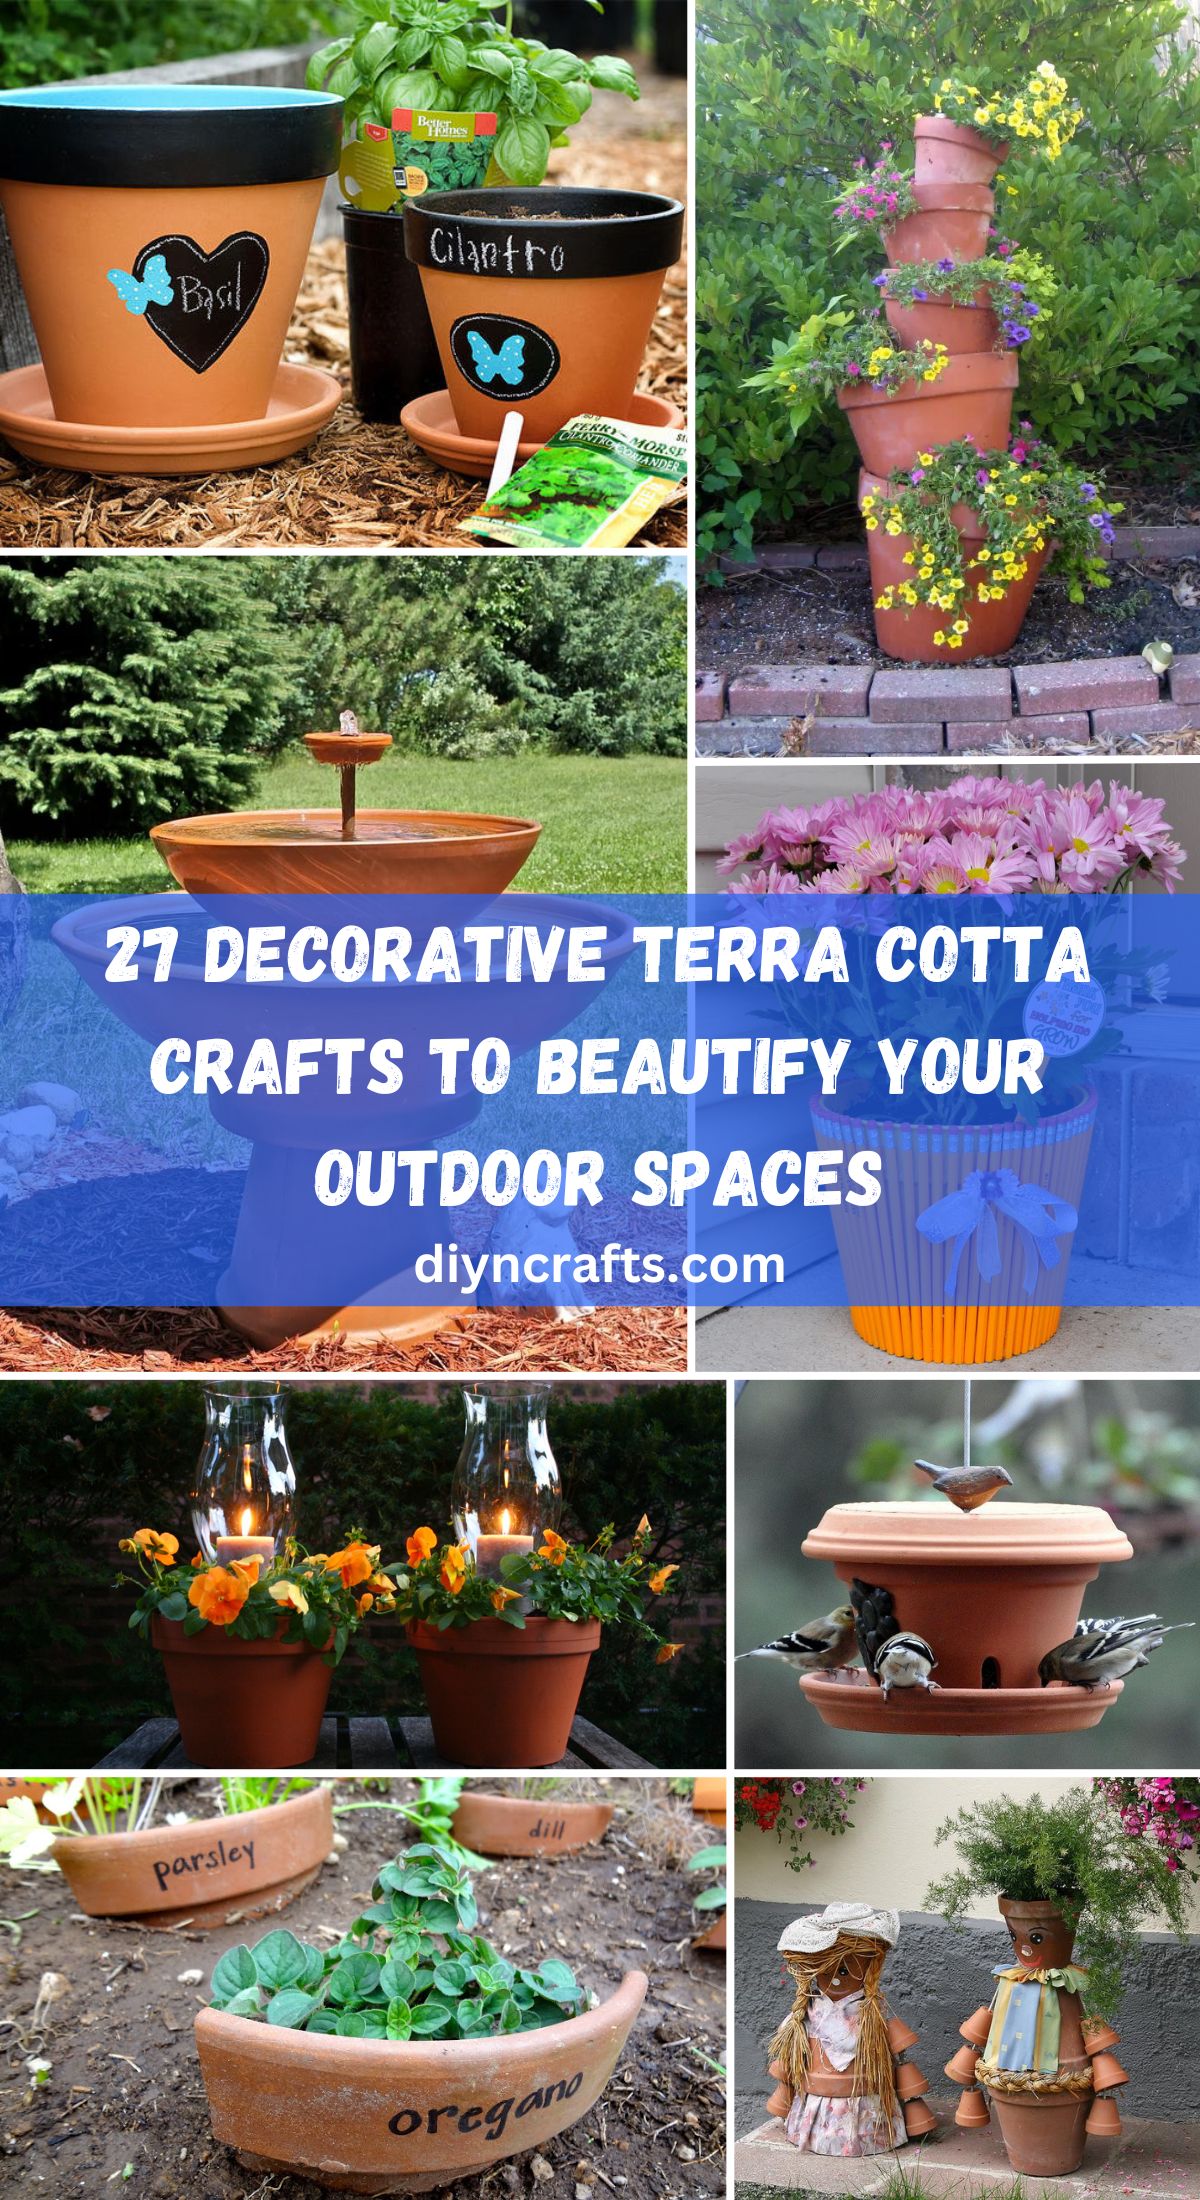 27 Decorative Terra Cotta Crafts To Beautify Your Outdoor Spaces collage.